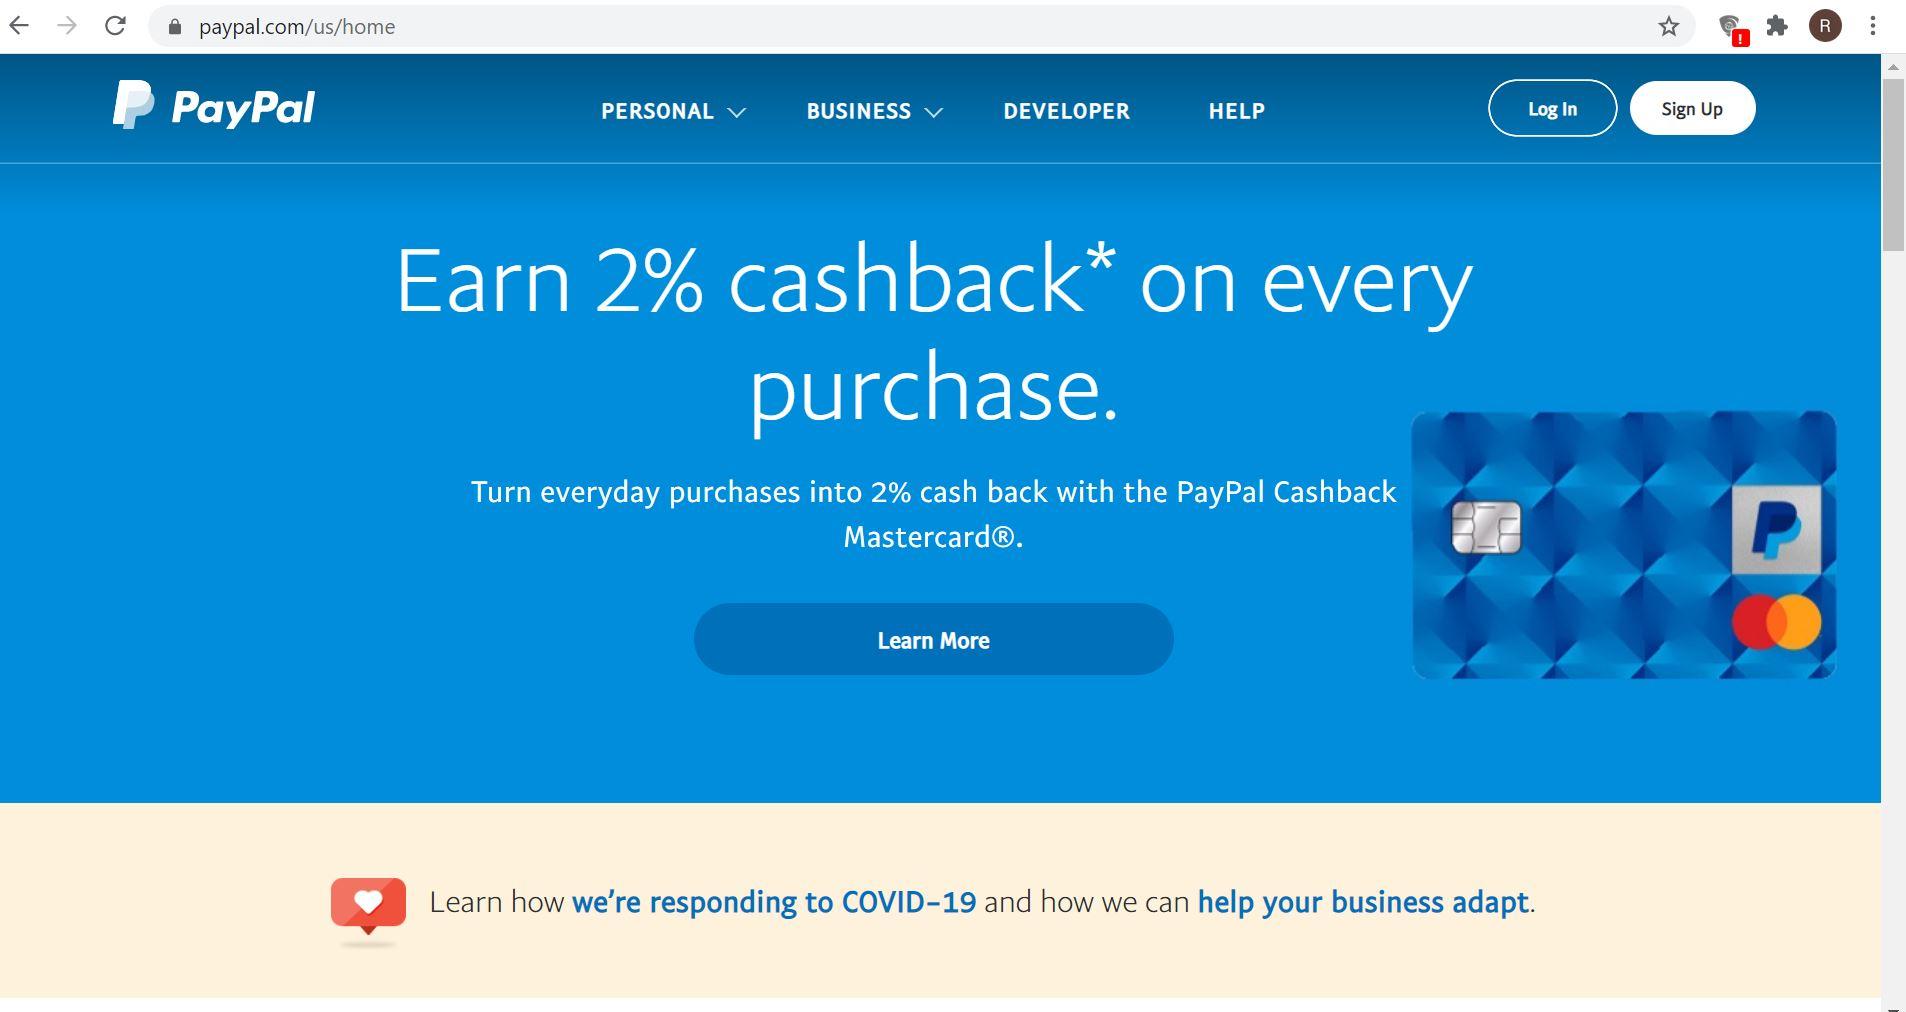 PayPal’s main page.